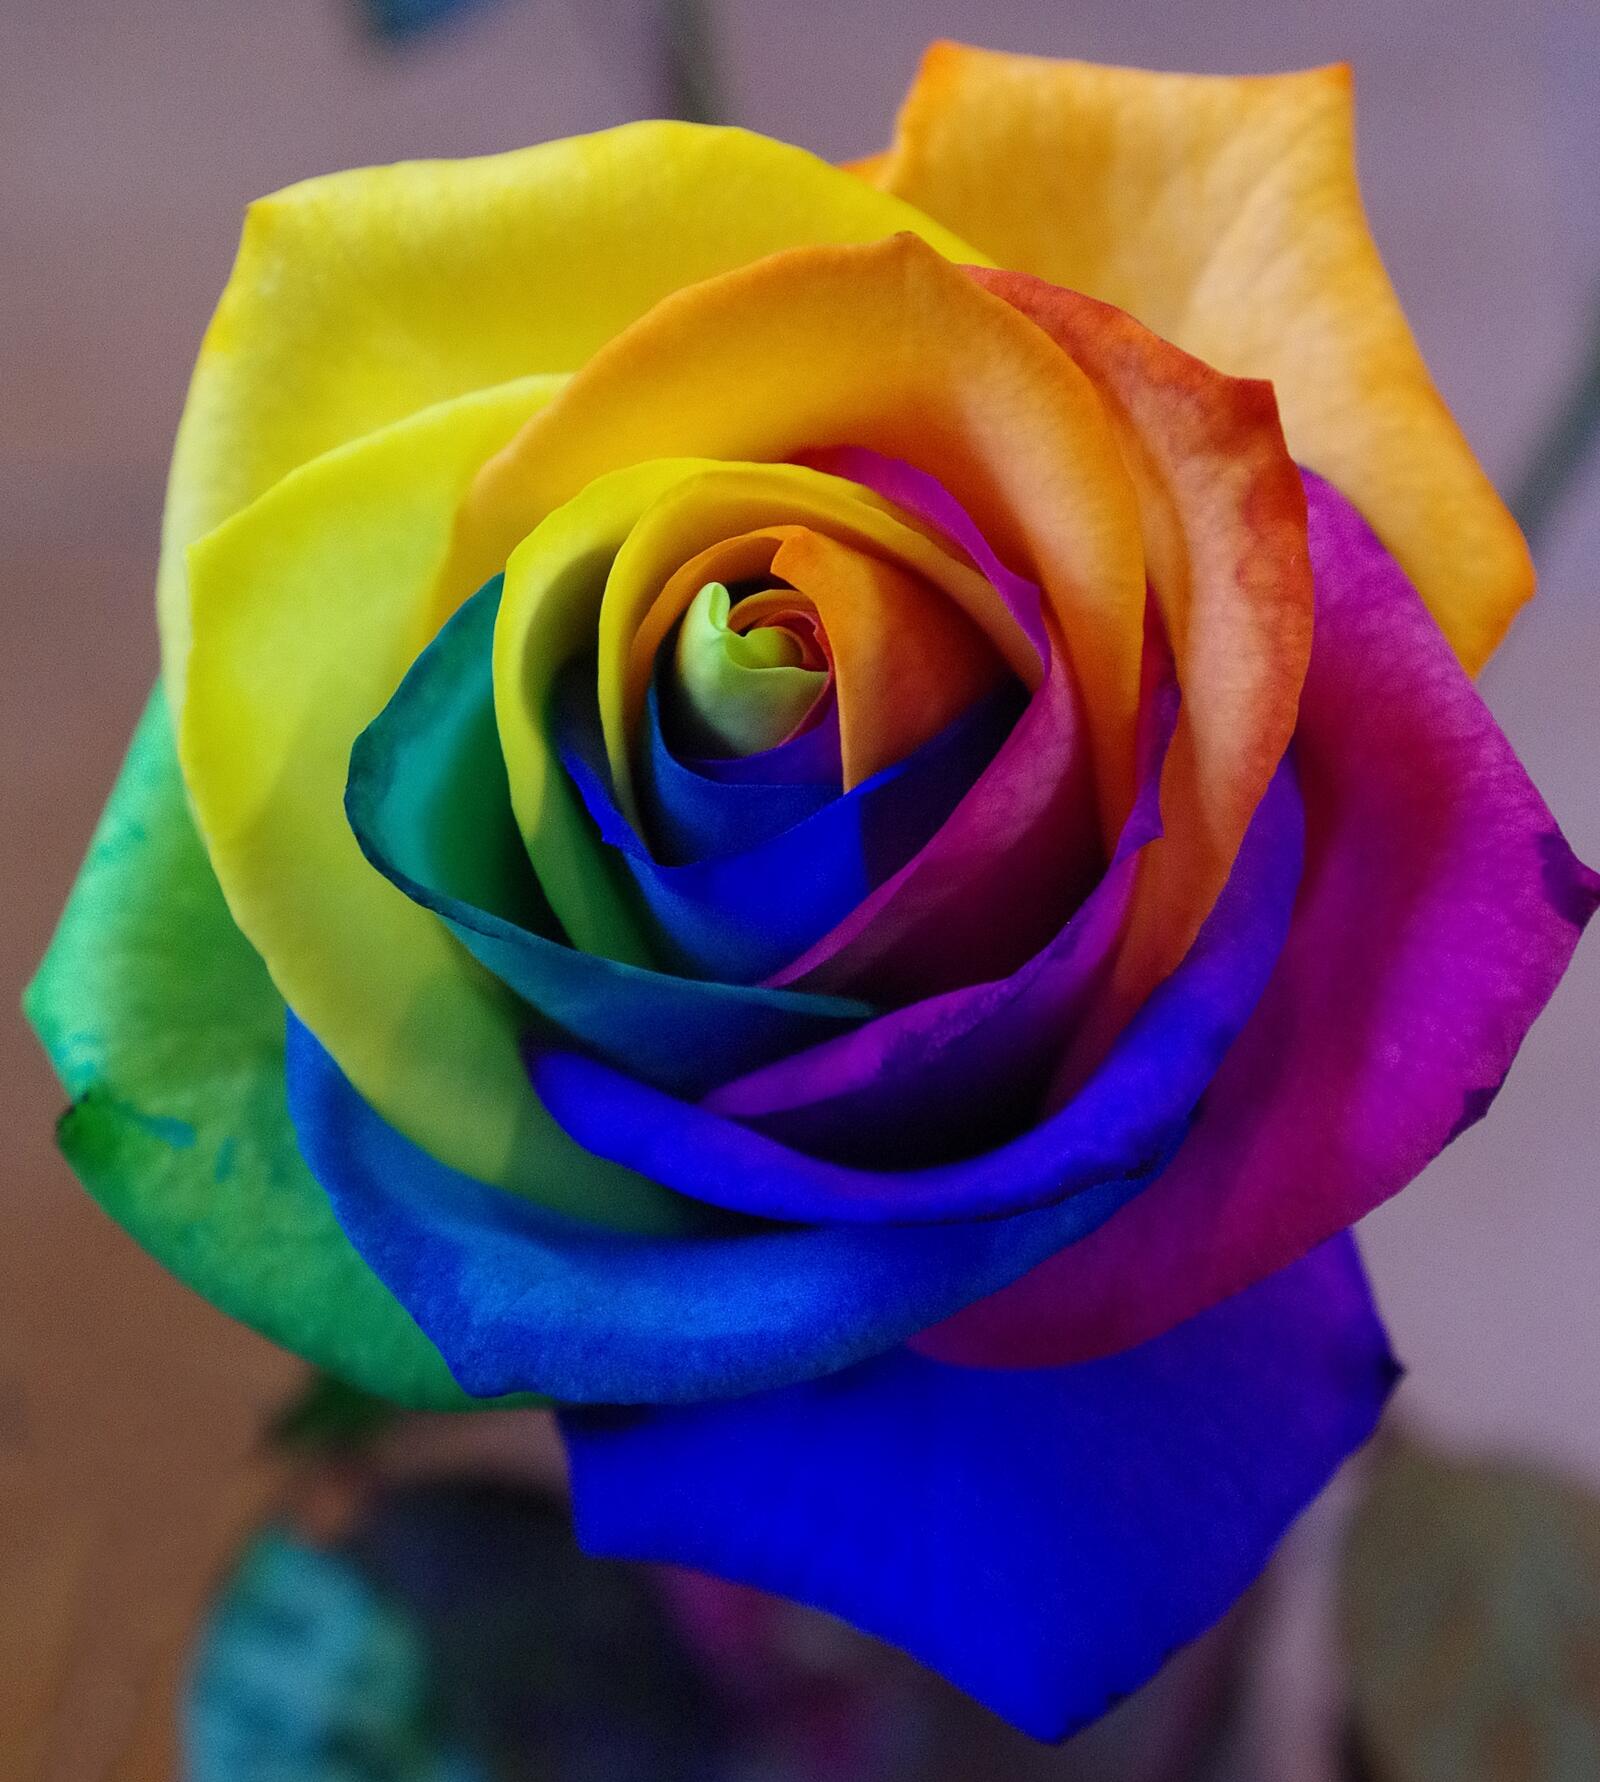 Free photo Colorful rose, colorful